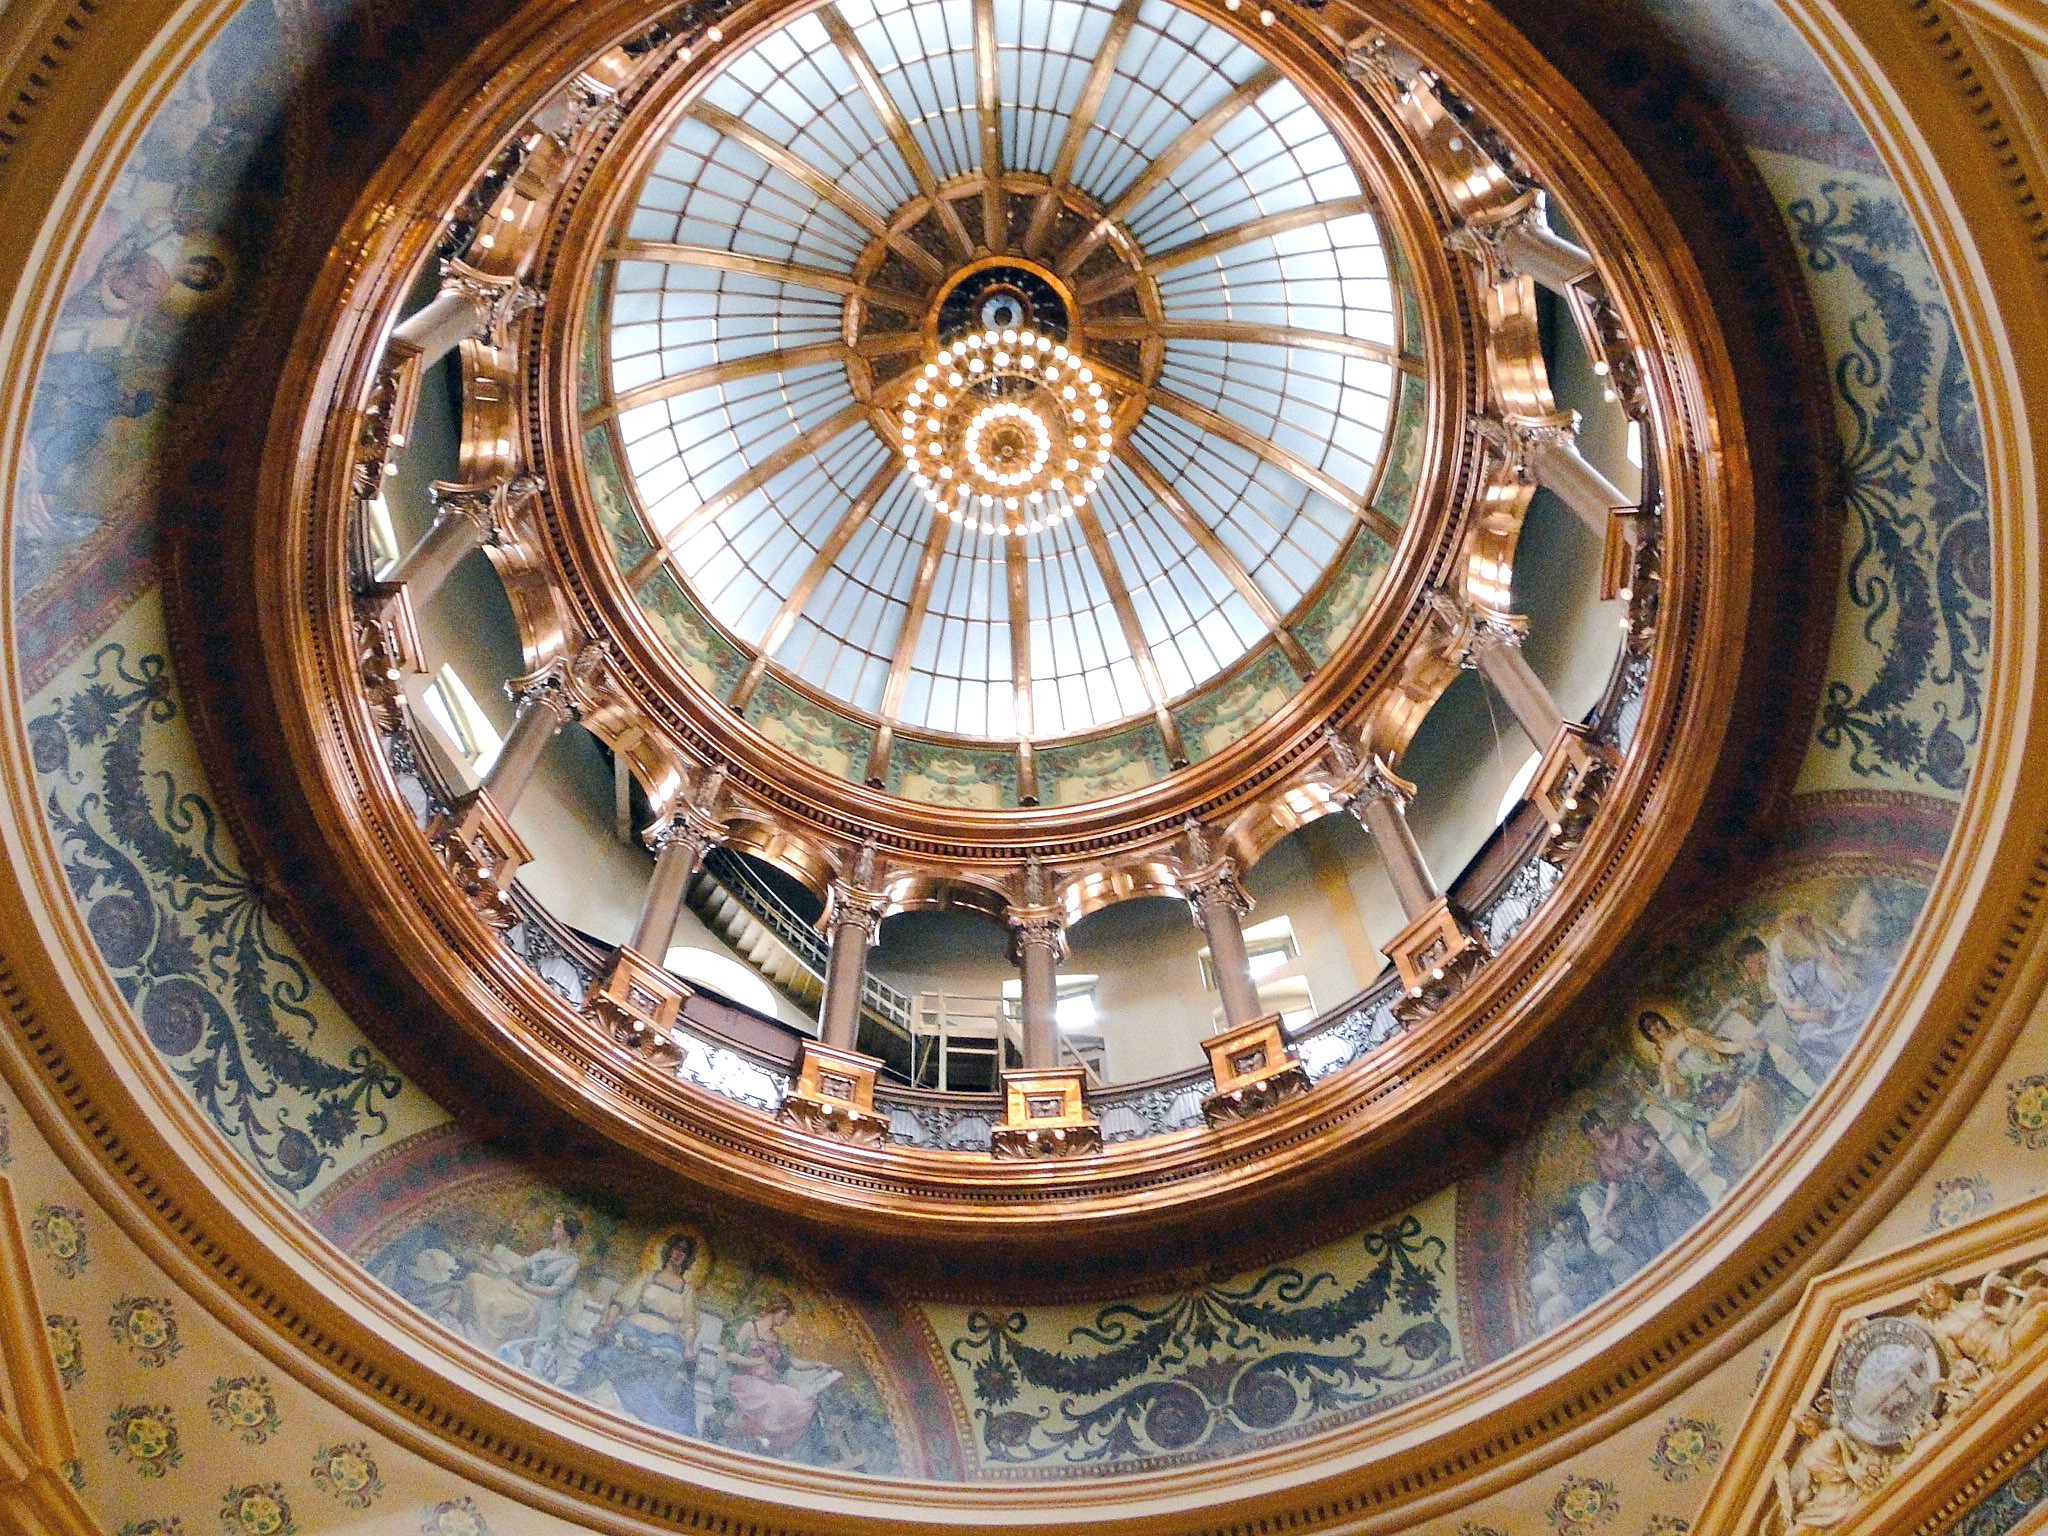 Inside of the dome at the Kansas state capital building